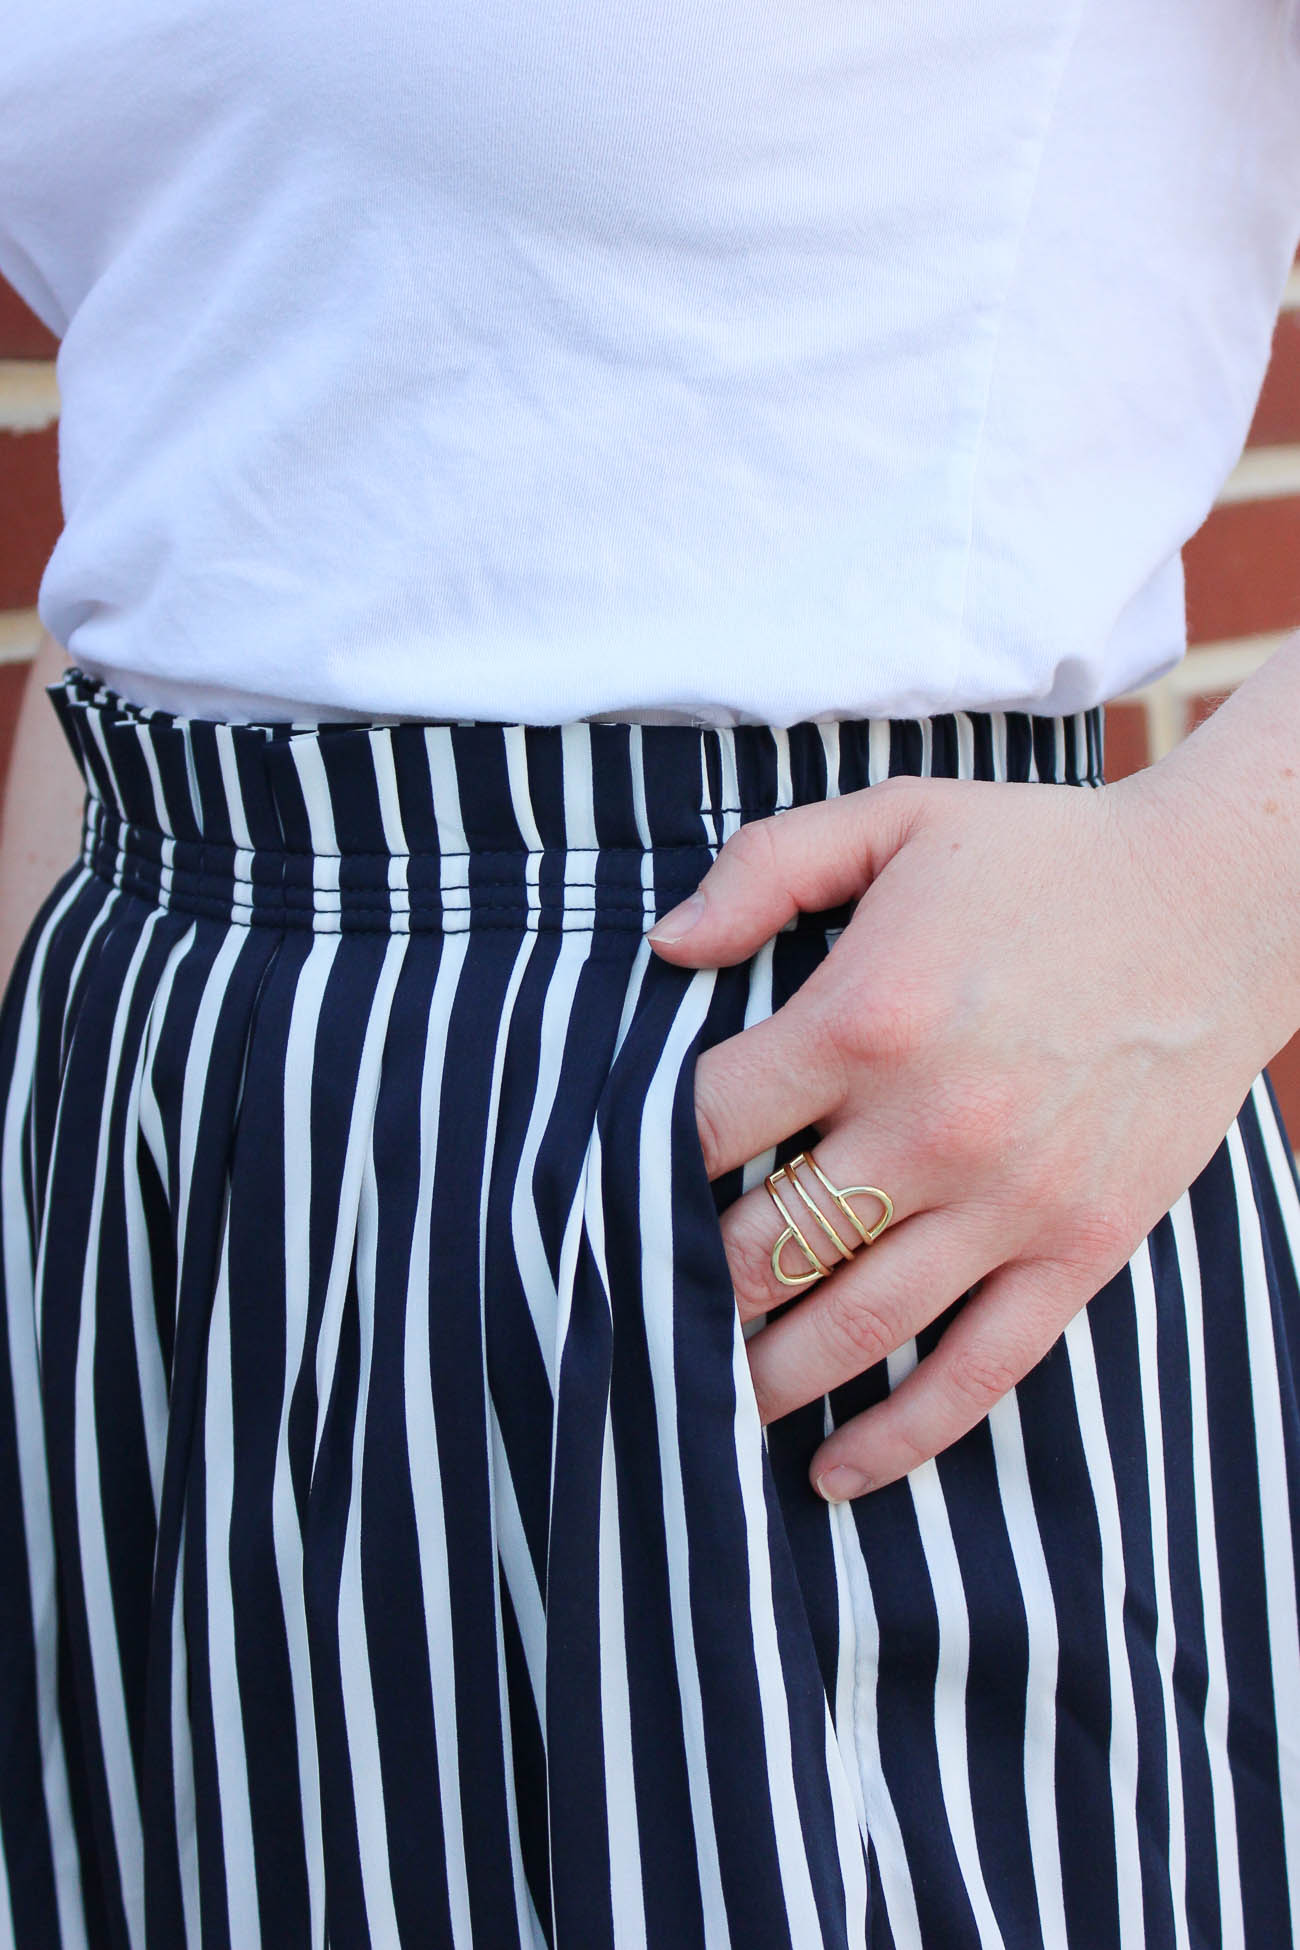 How to Not Make Stupid Mistakes During Major Sales | Something Good, @danaerinw, madewell ring, rings, open ring, half circle ring, striped skirt, navy stripes, horizontal striped skirt